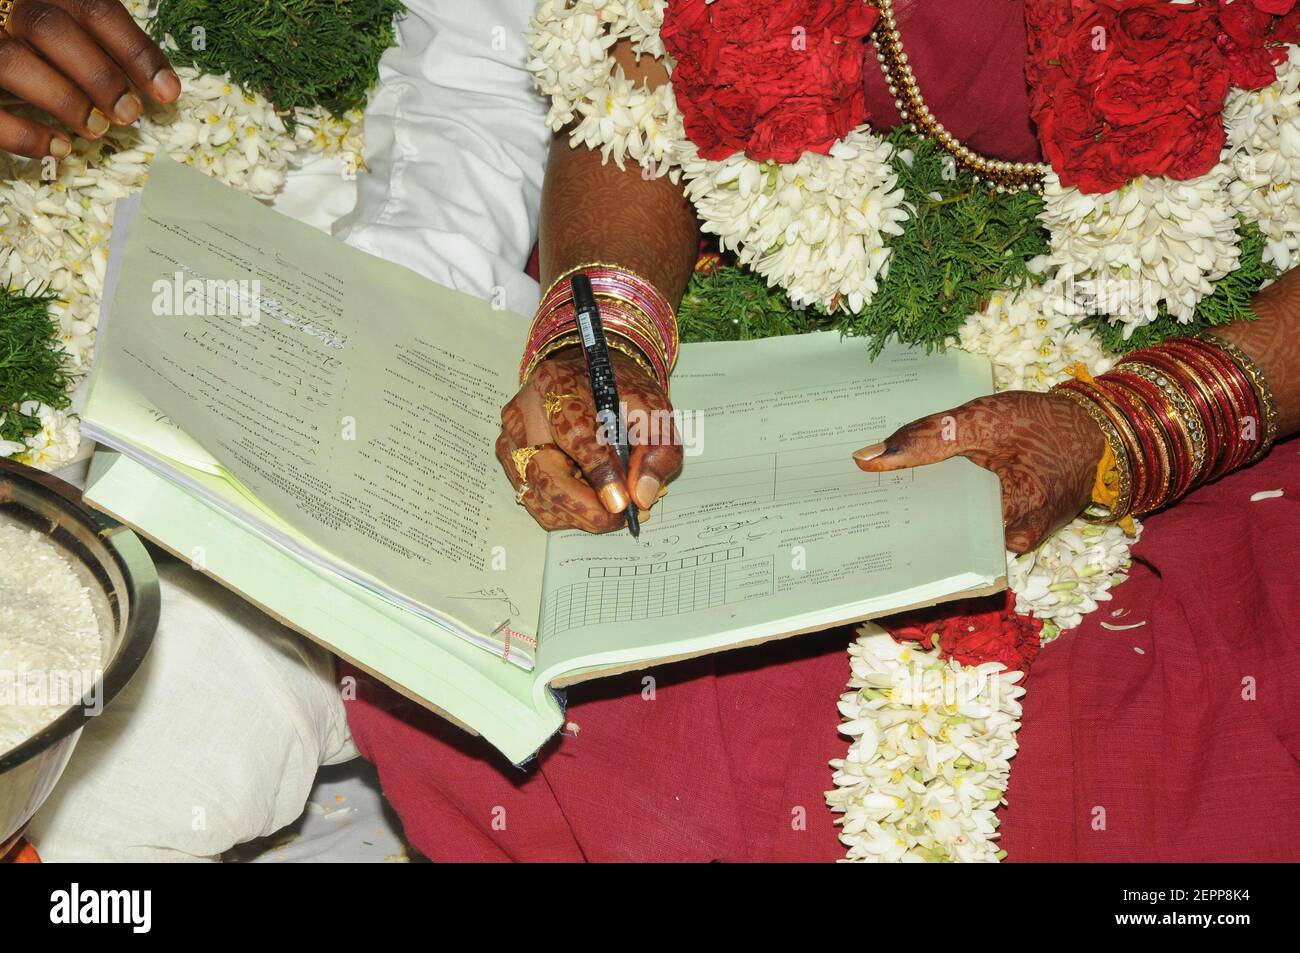 South Indian wedding bride and groom signing Marriage registration in wedding attire Stock Photo